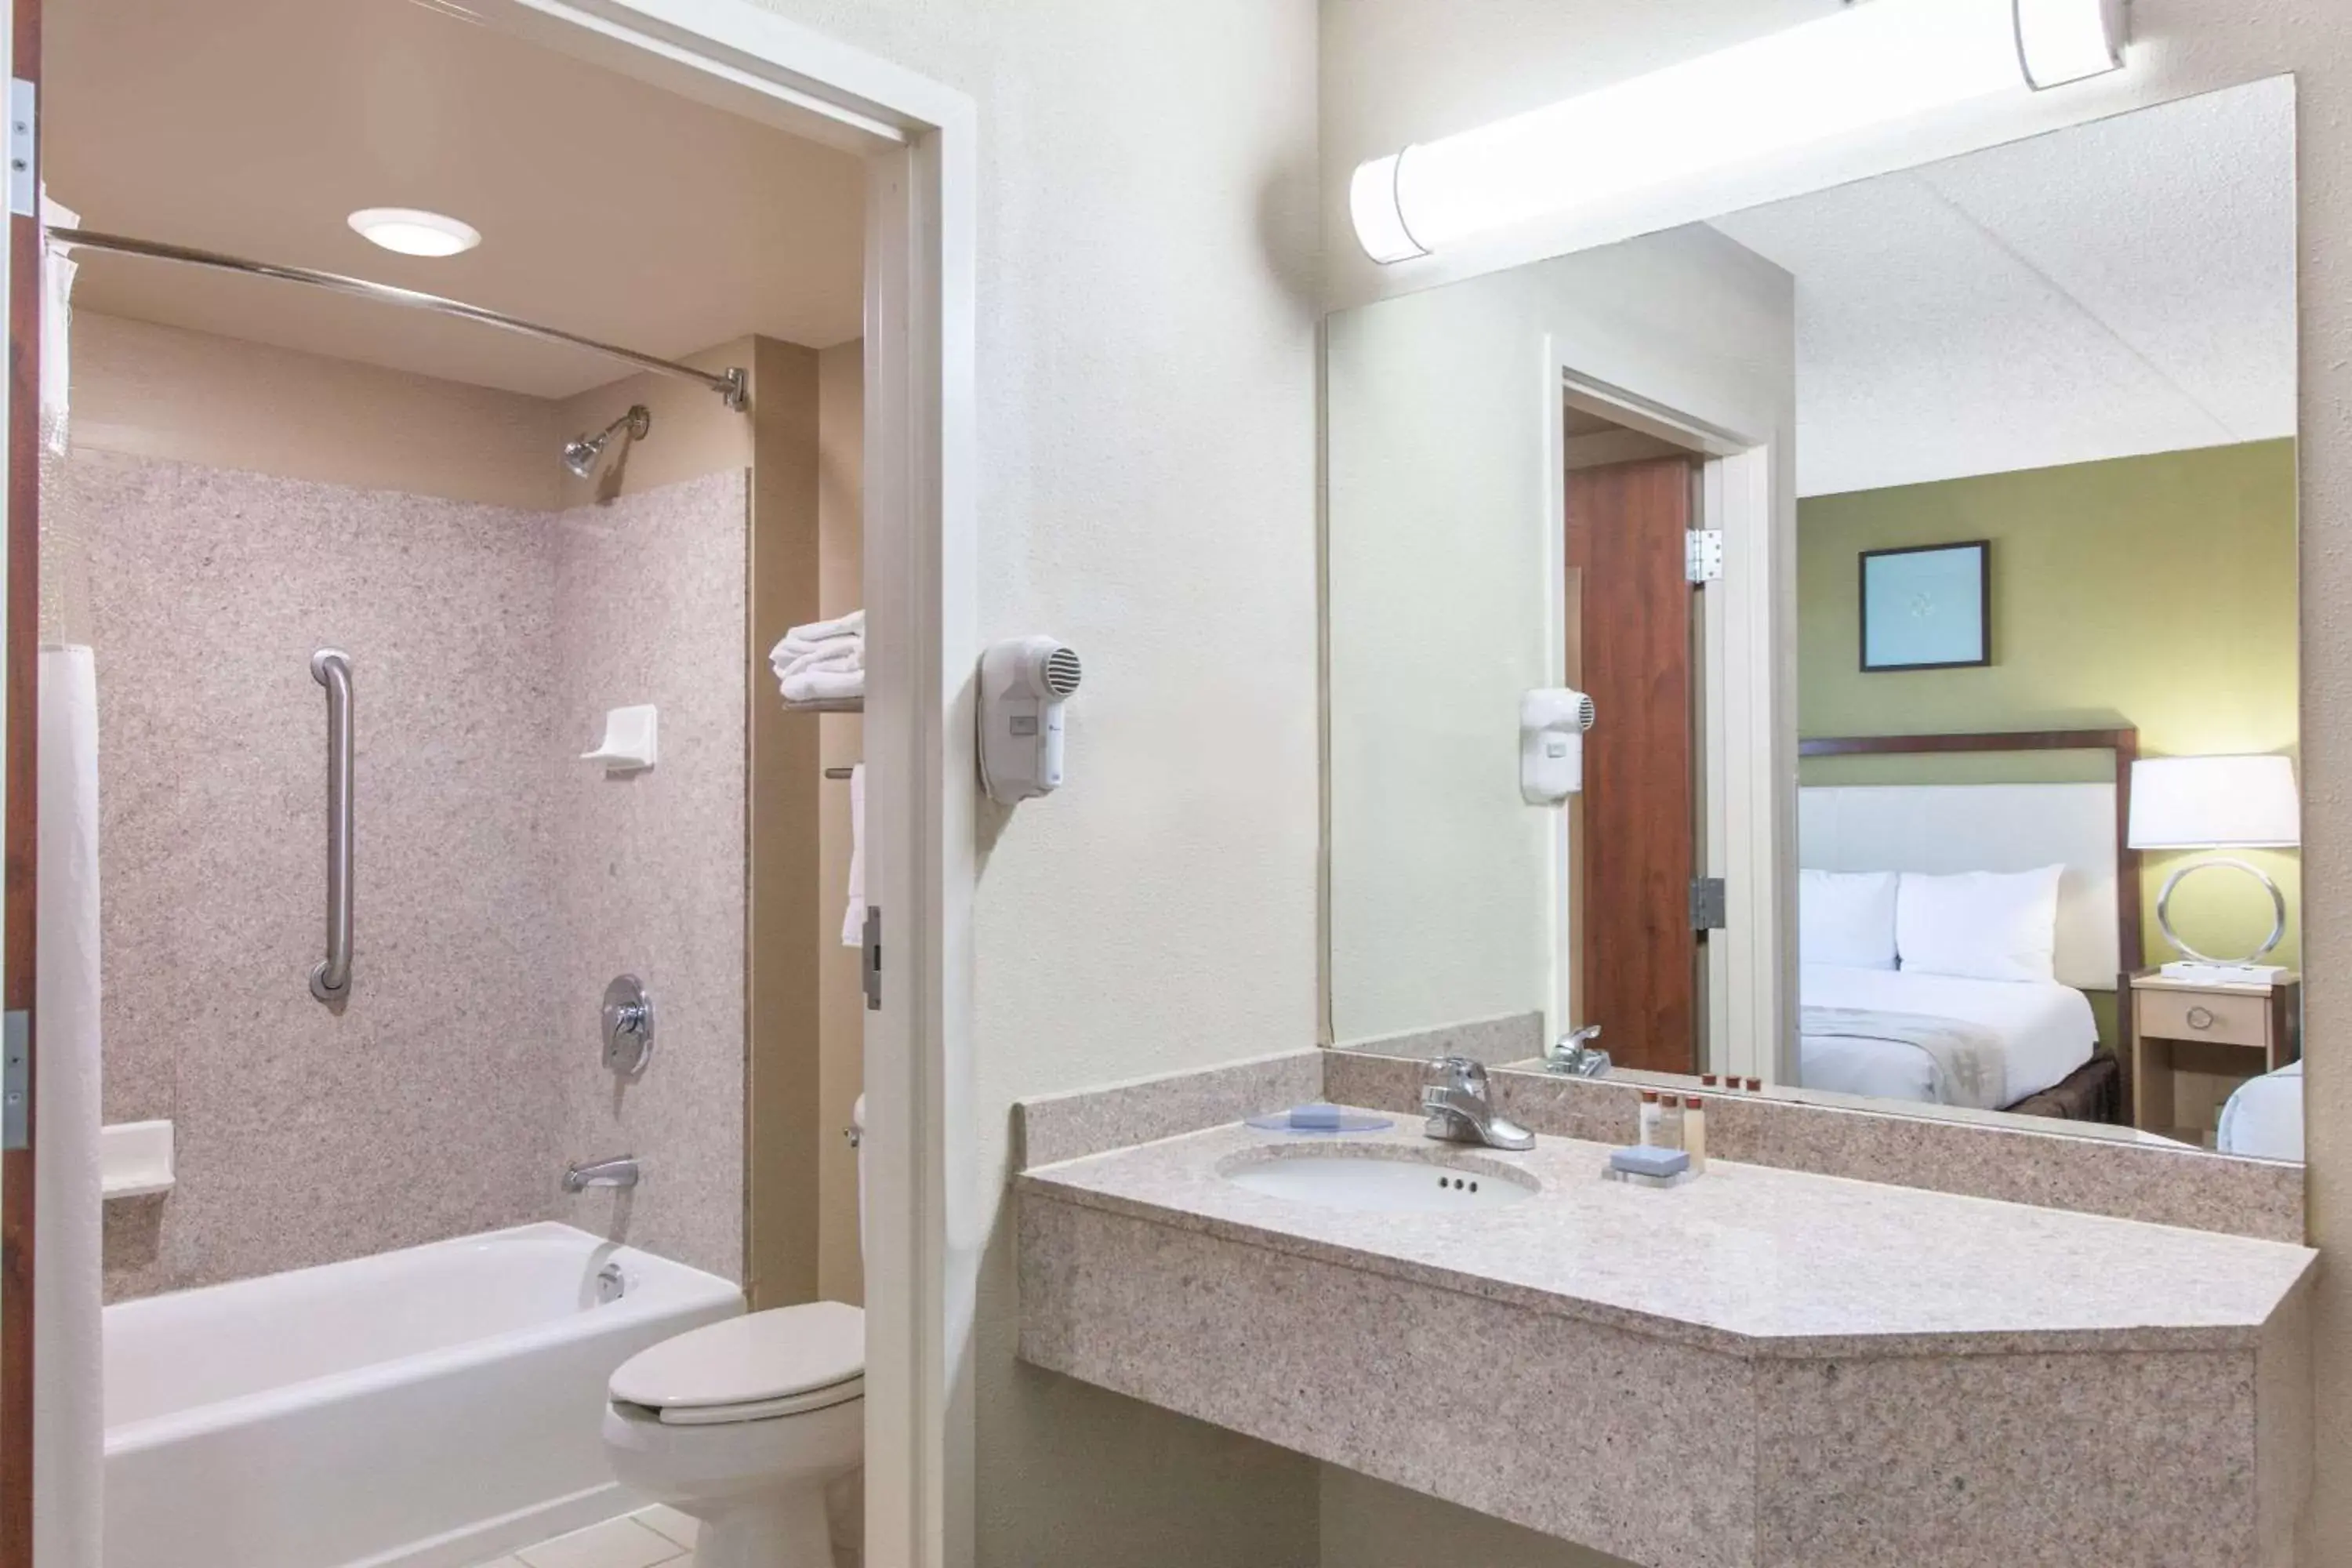 Bathroom in Hawthorn Suites Midwest City